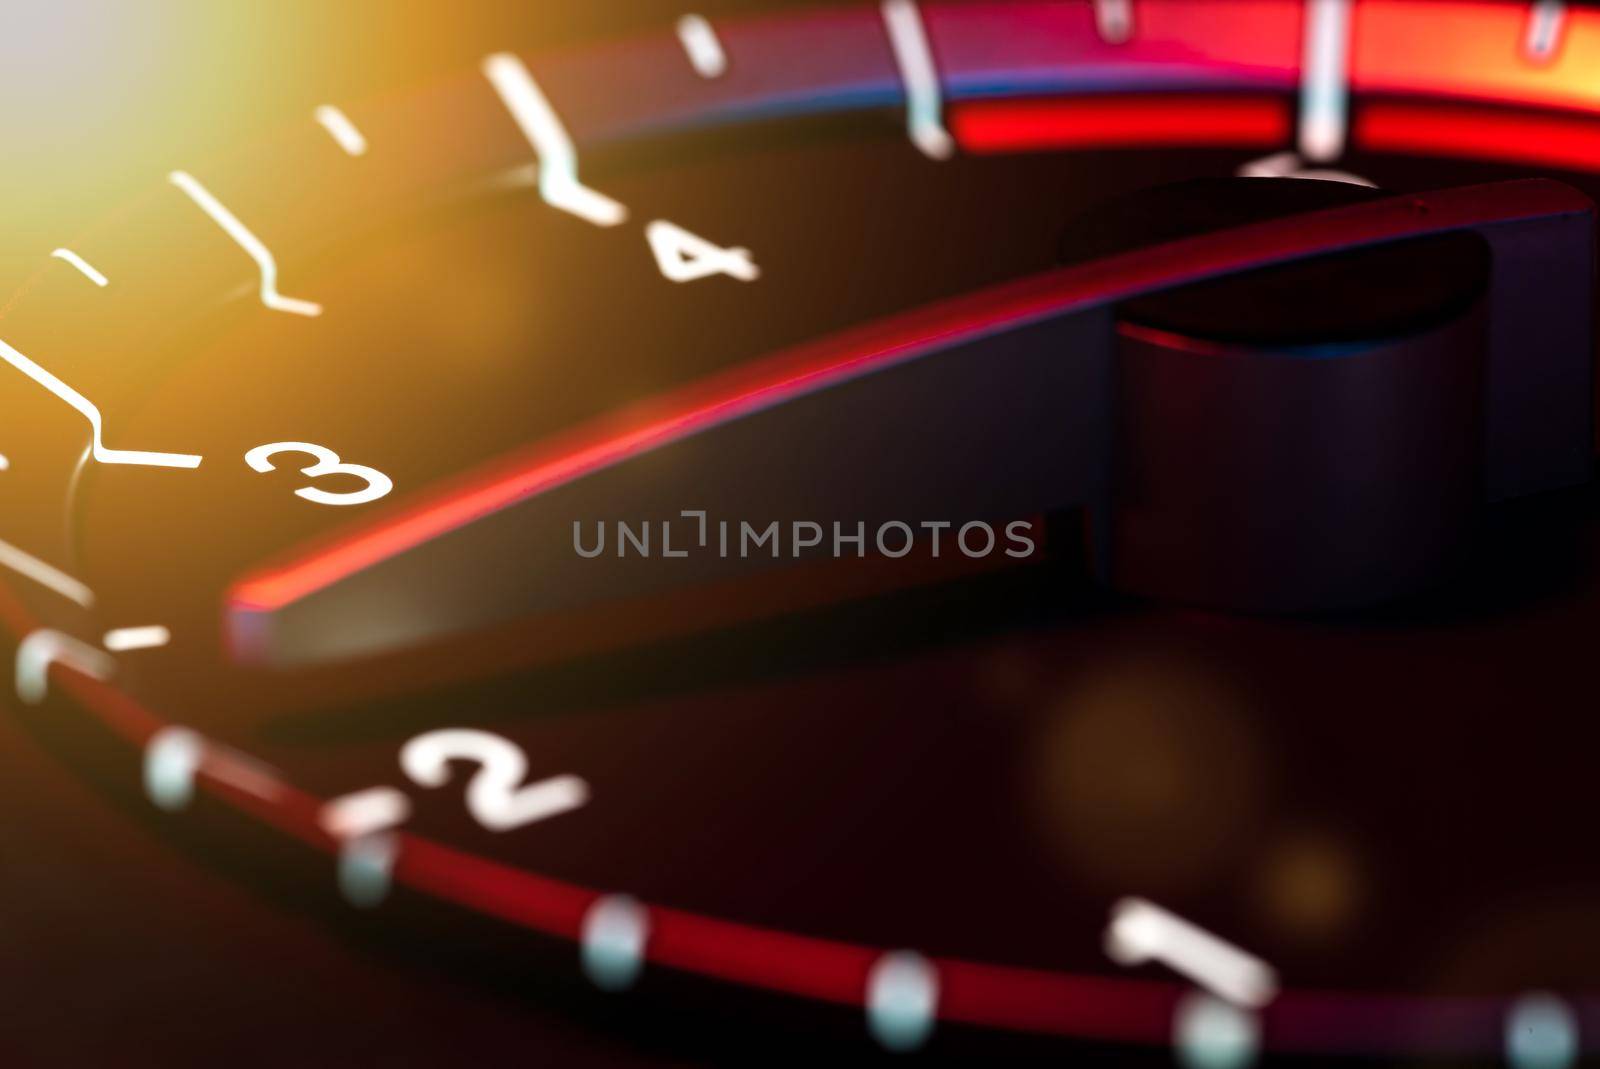 Rpm car odometer detail 7 by pippocarlot